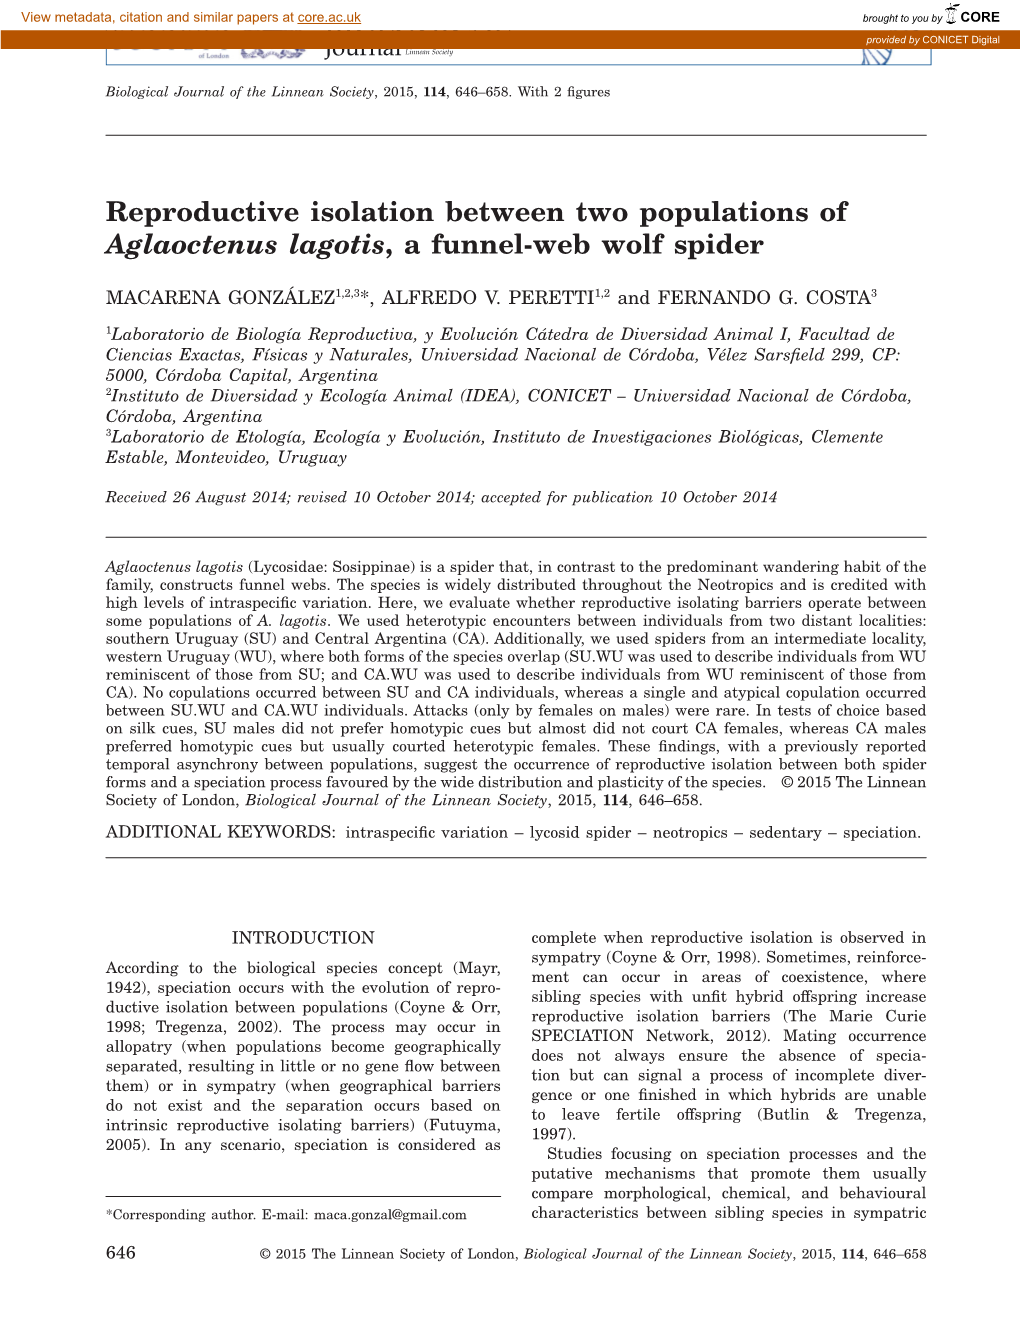 Reproductive Isolation Between Two Populations of Aglaoctenus Lagotis, a Funnel-Web Wolf Spider